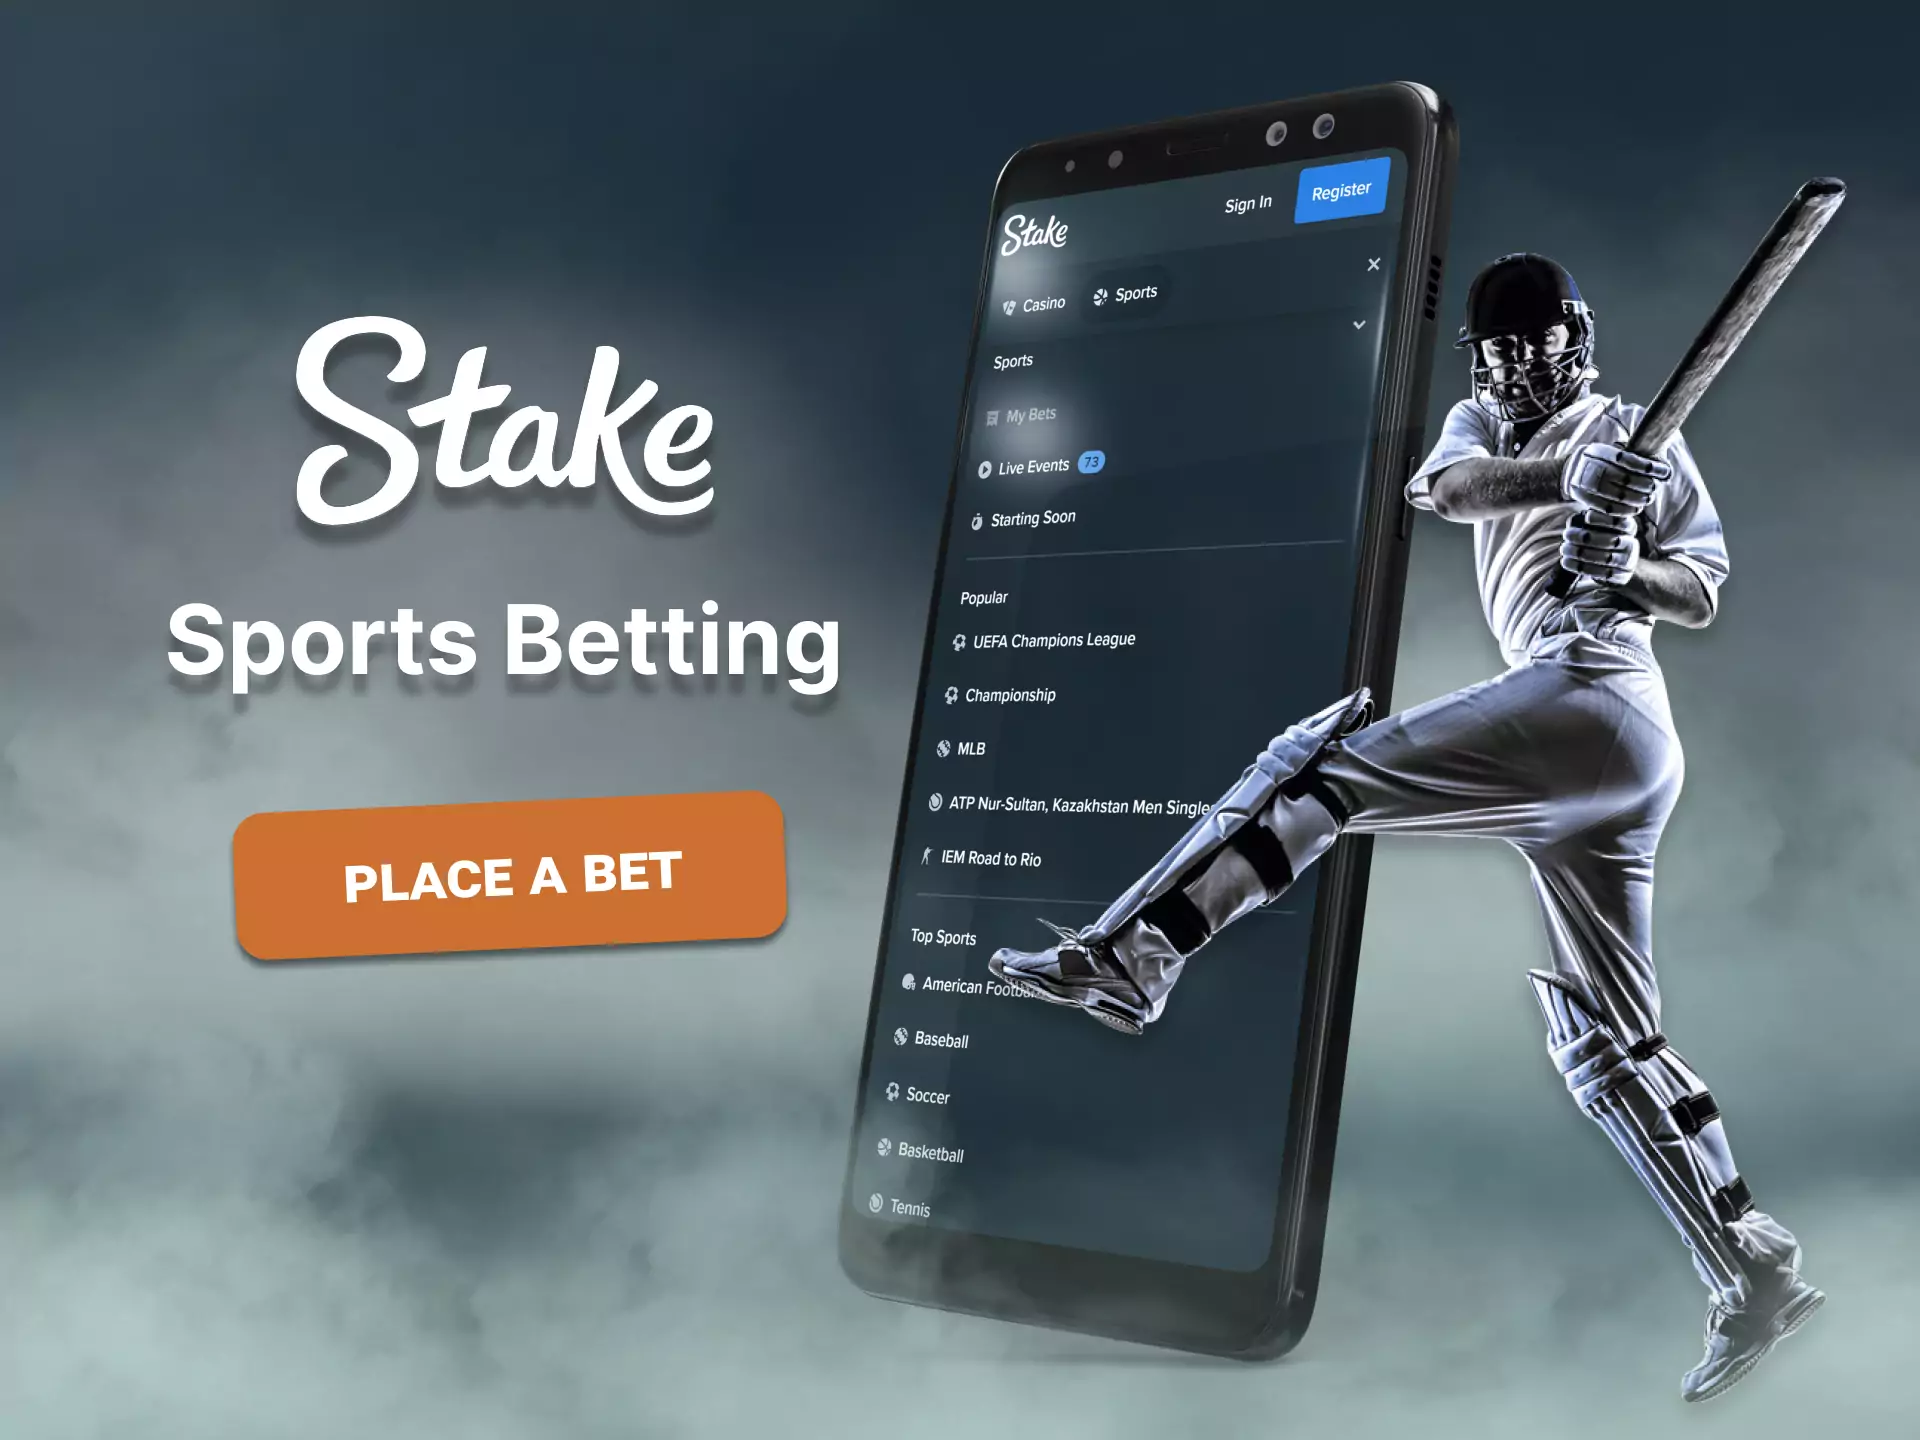 In Stake.com place bets on different sports.